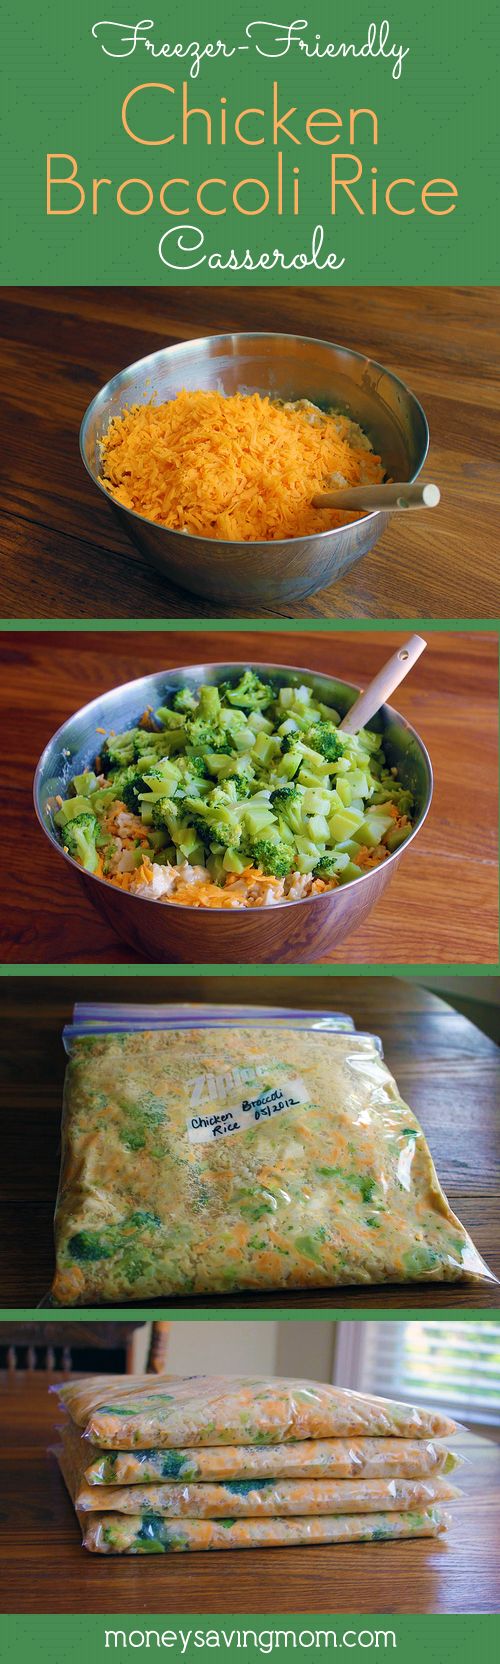 Freezer Friendly Chicken Broccoli Rice Casserole -- this recipe is hands down one of our very favorite. It's easy to whip up, it's frugal, and it freezes well!